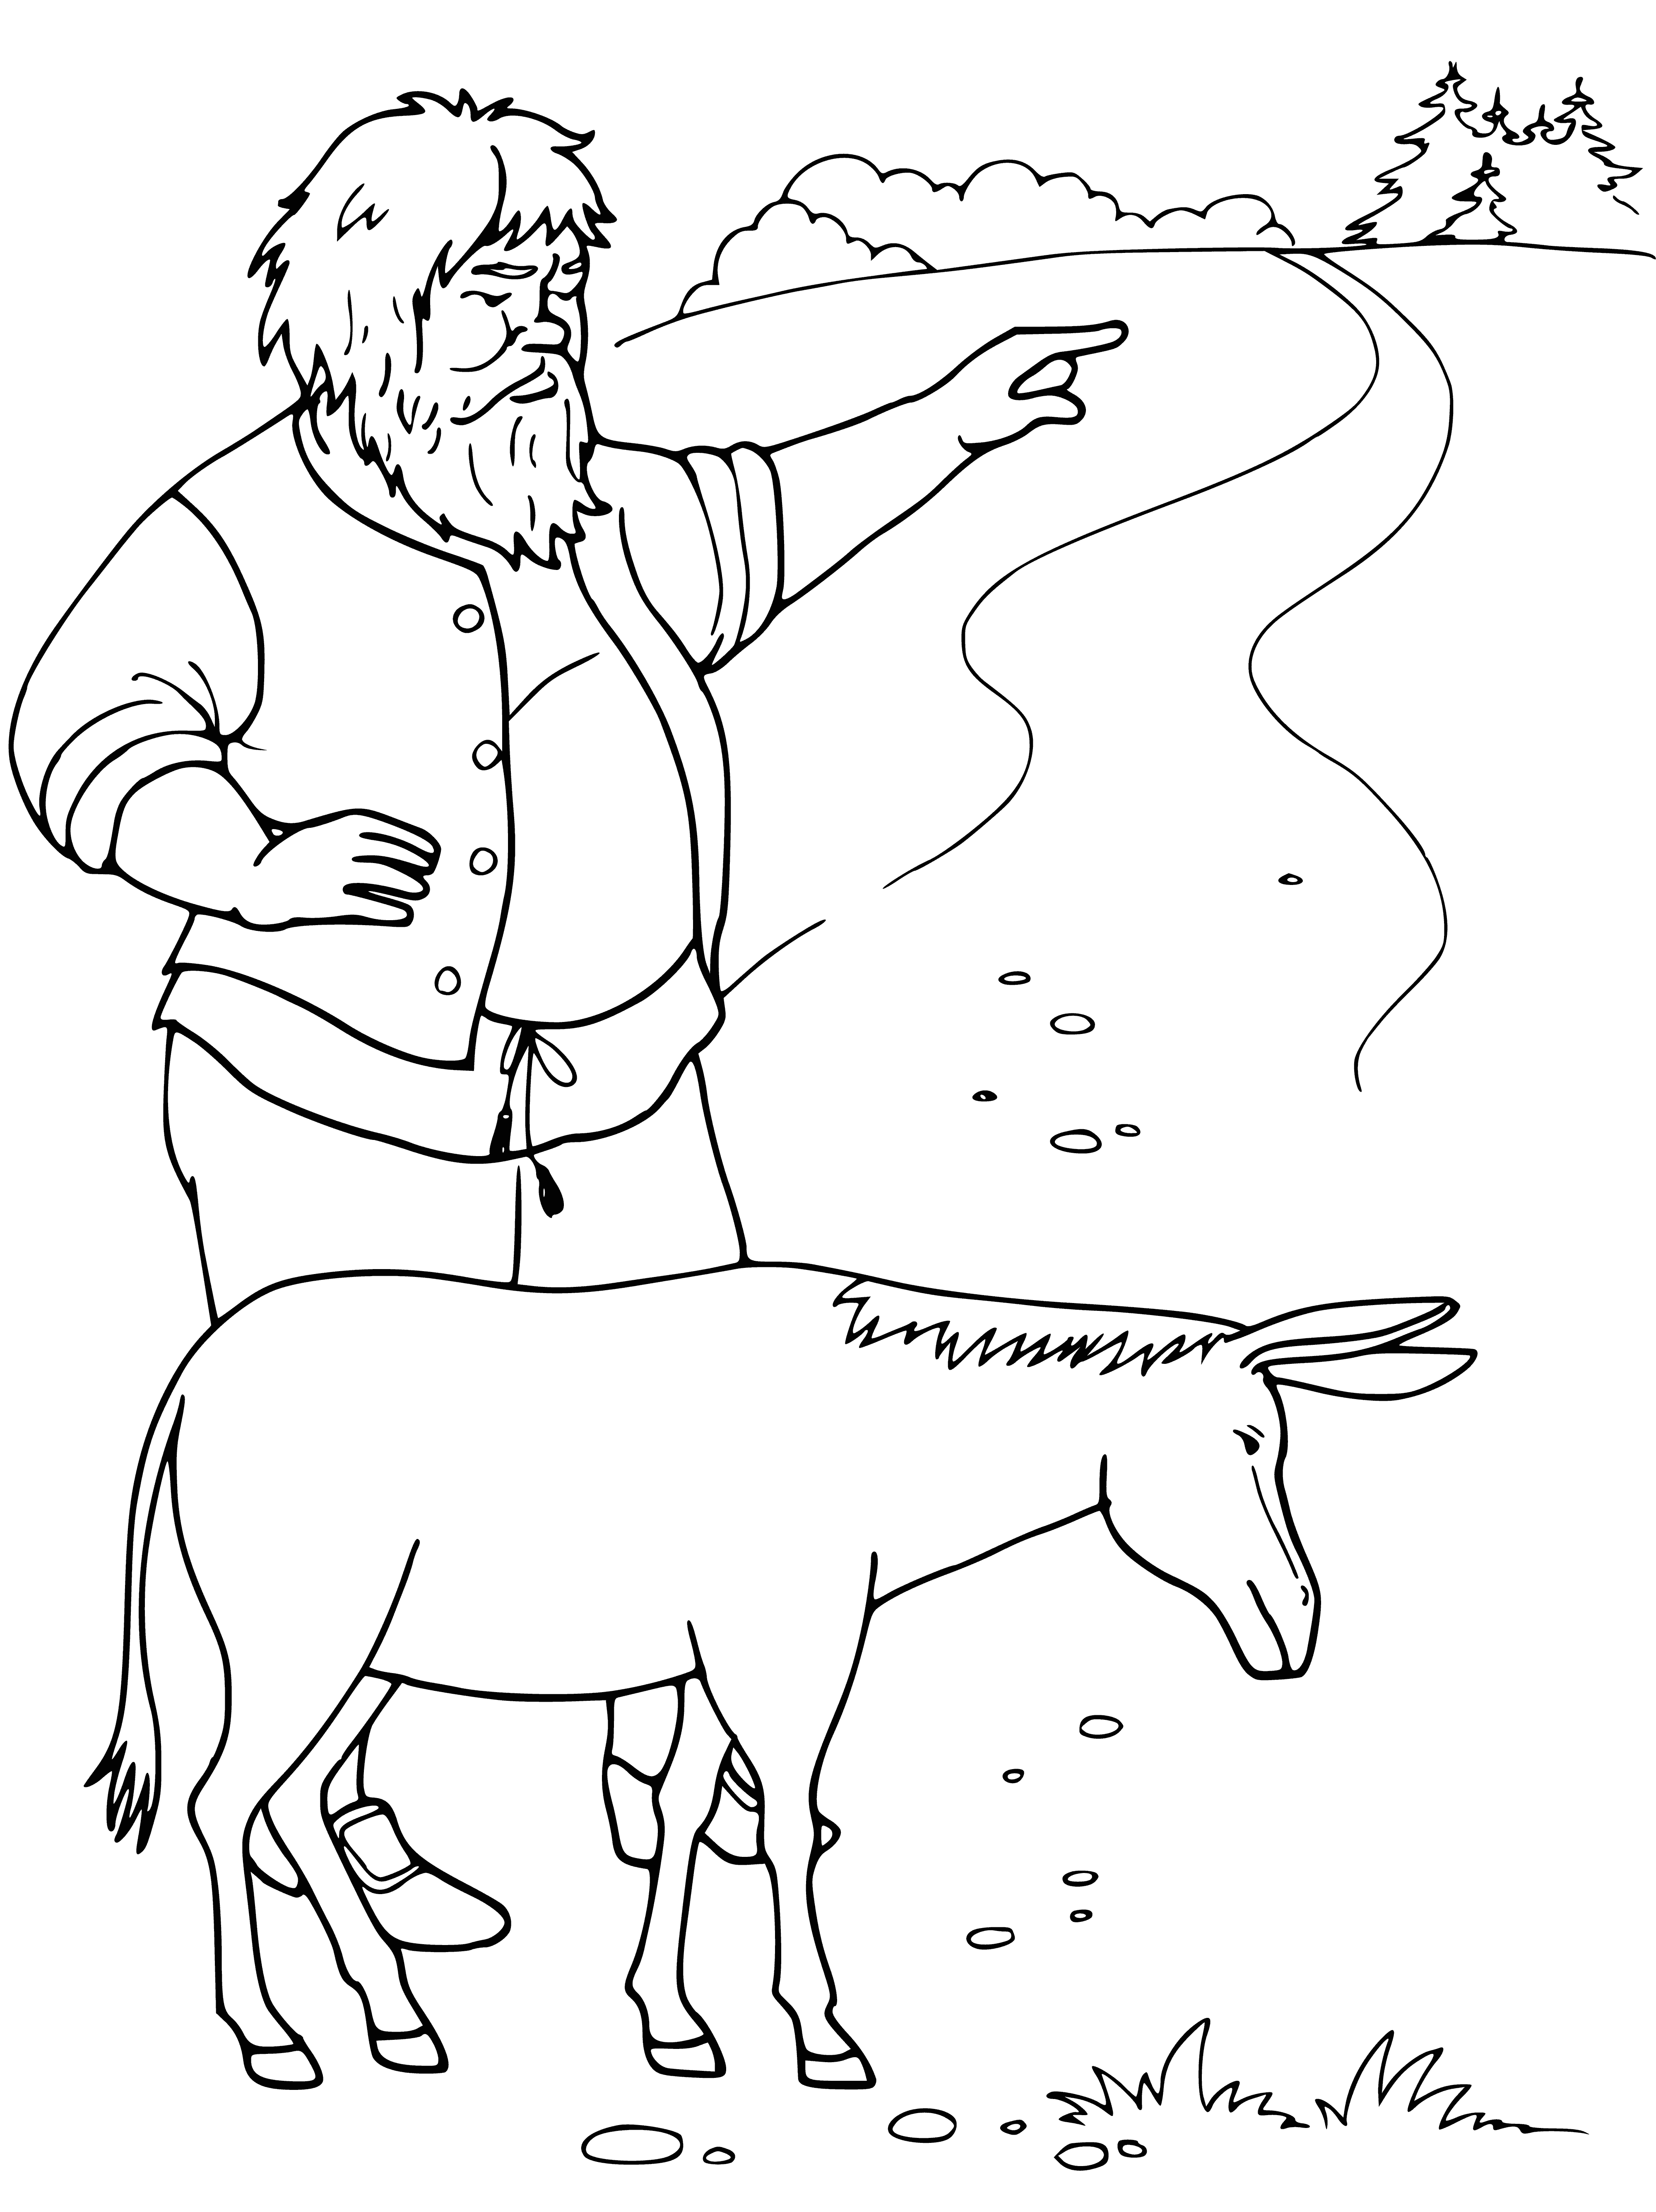 coloring page: Donkey stands on dirt path in front of cottage, braying. Fur patchy, ears long and floppy.